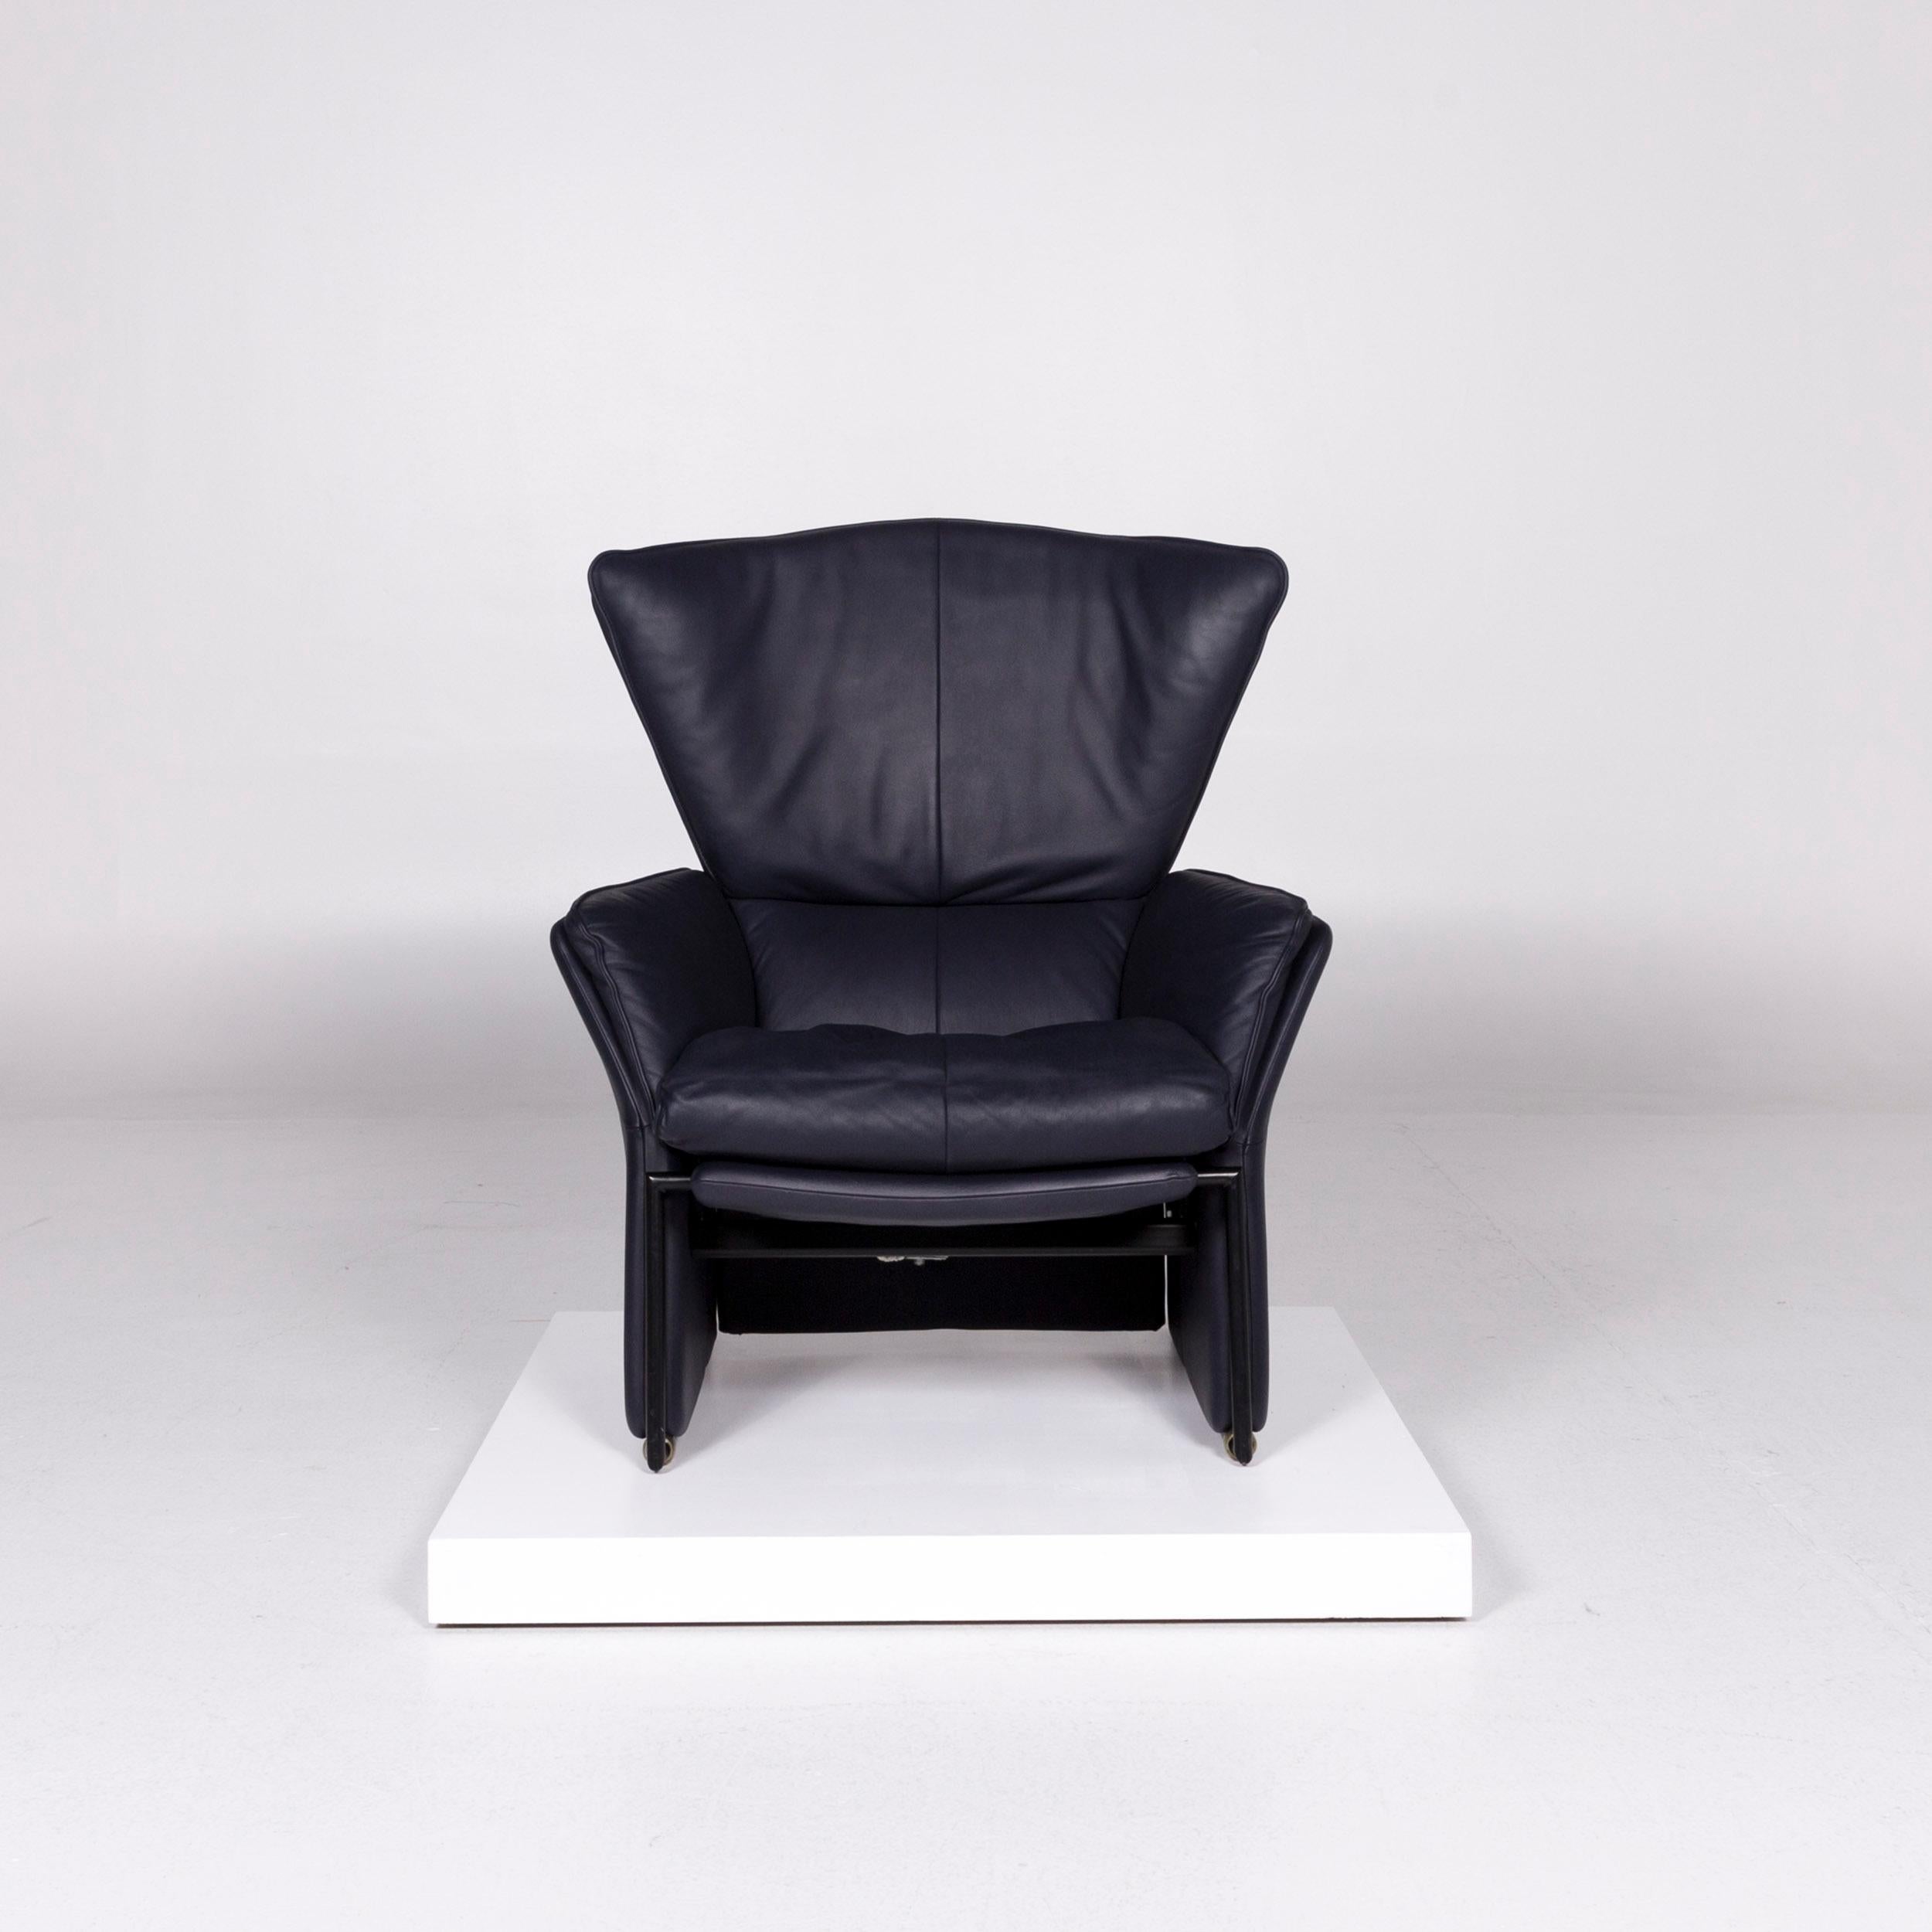 We bring to you a FSM Unus leather rmchair blue dark blue relaxation function.
 
 Product measurements in centimeters:
 
Depth 92
Width 85
Height 97
Seat-height 56
Rest-height 57
Seat-depth 55
Seat-width 49
Back-height 56.
   